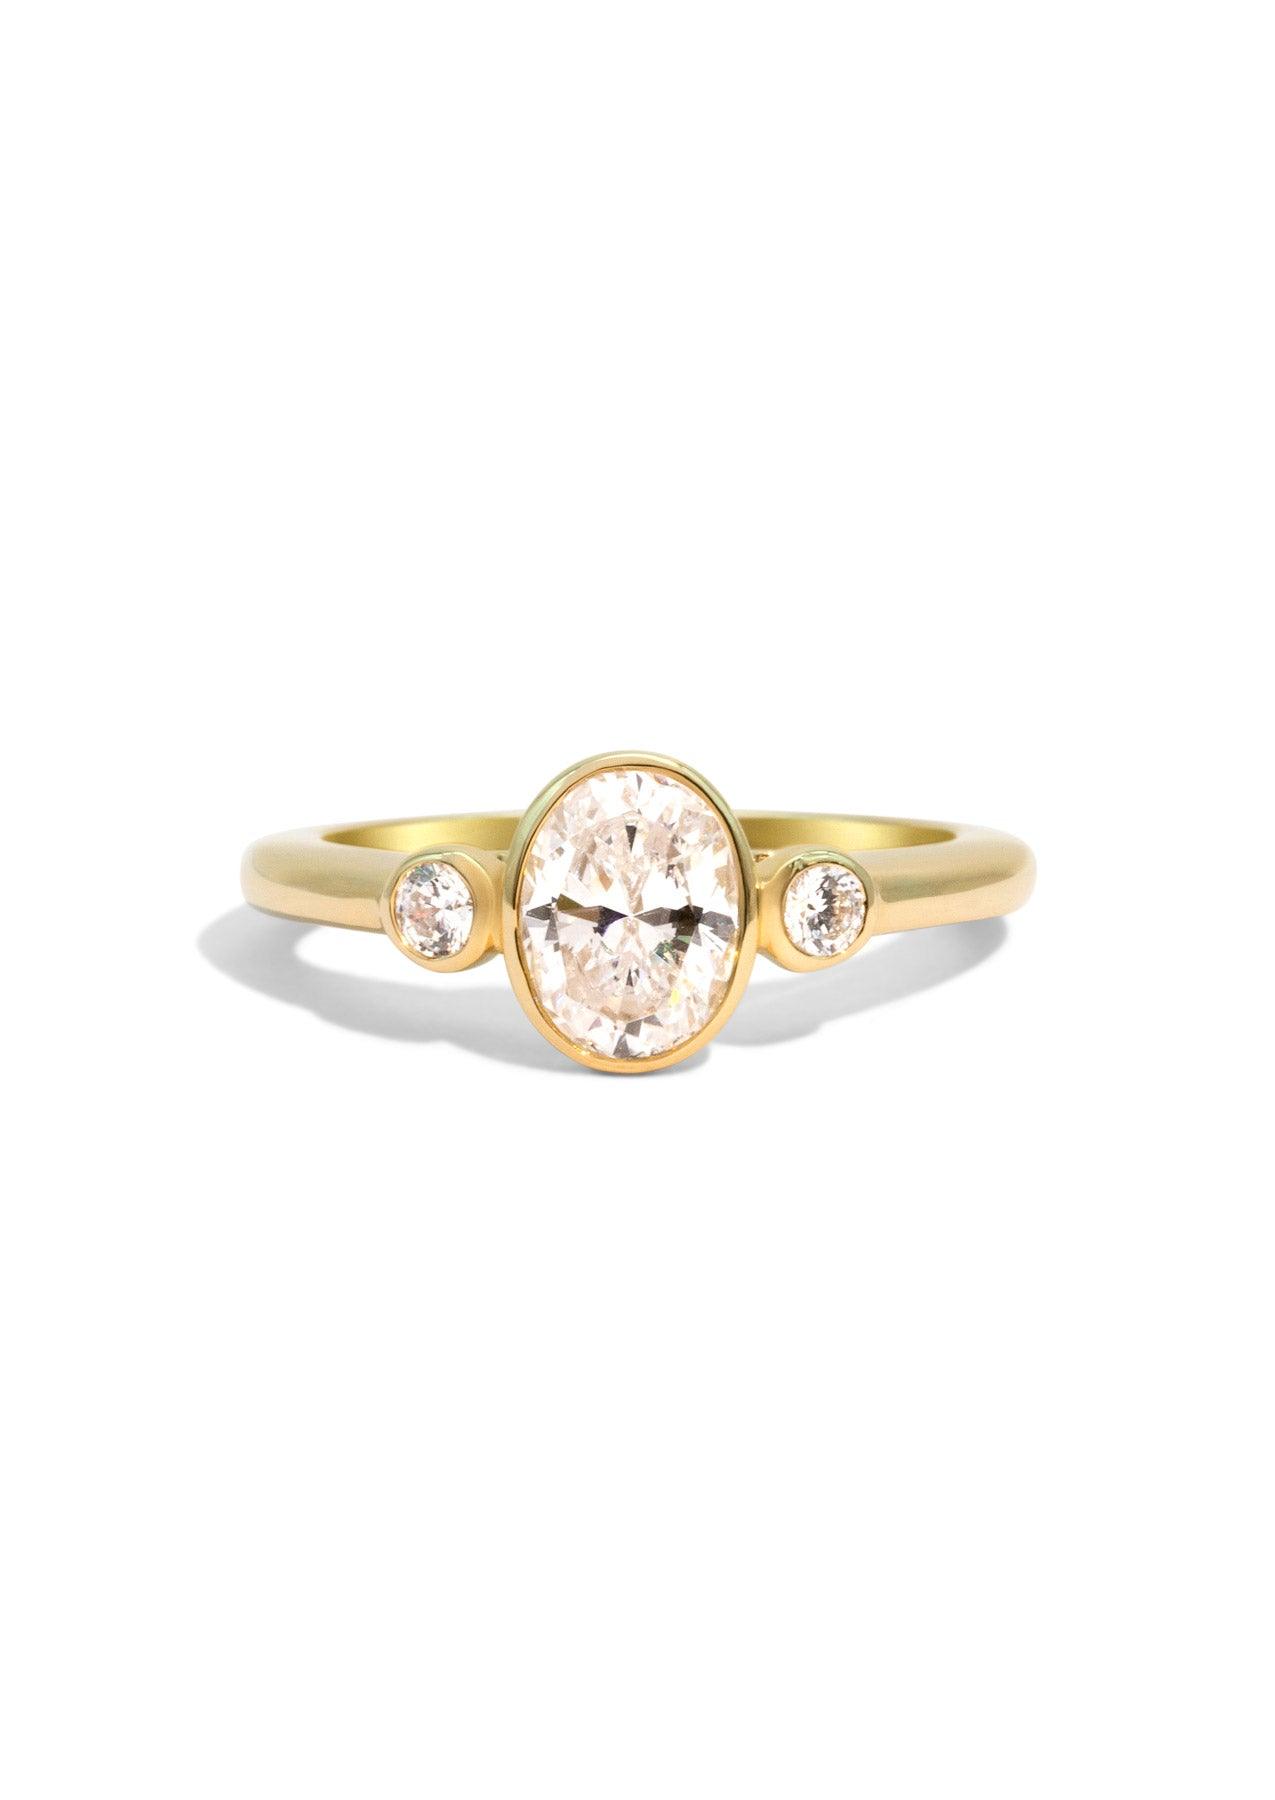 The Beatrice Ring with 0.7ct Oval Cultured Diamond